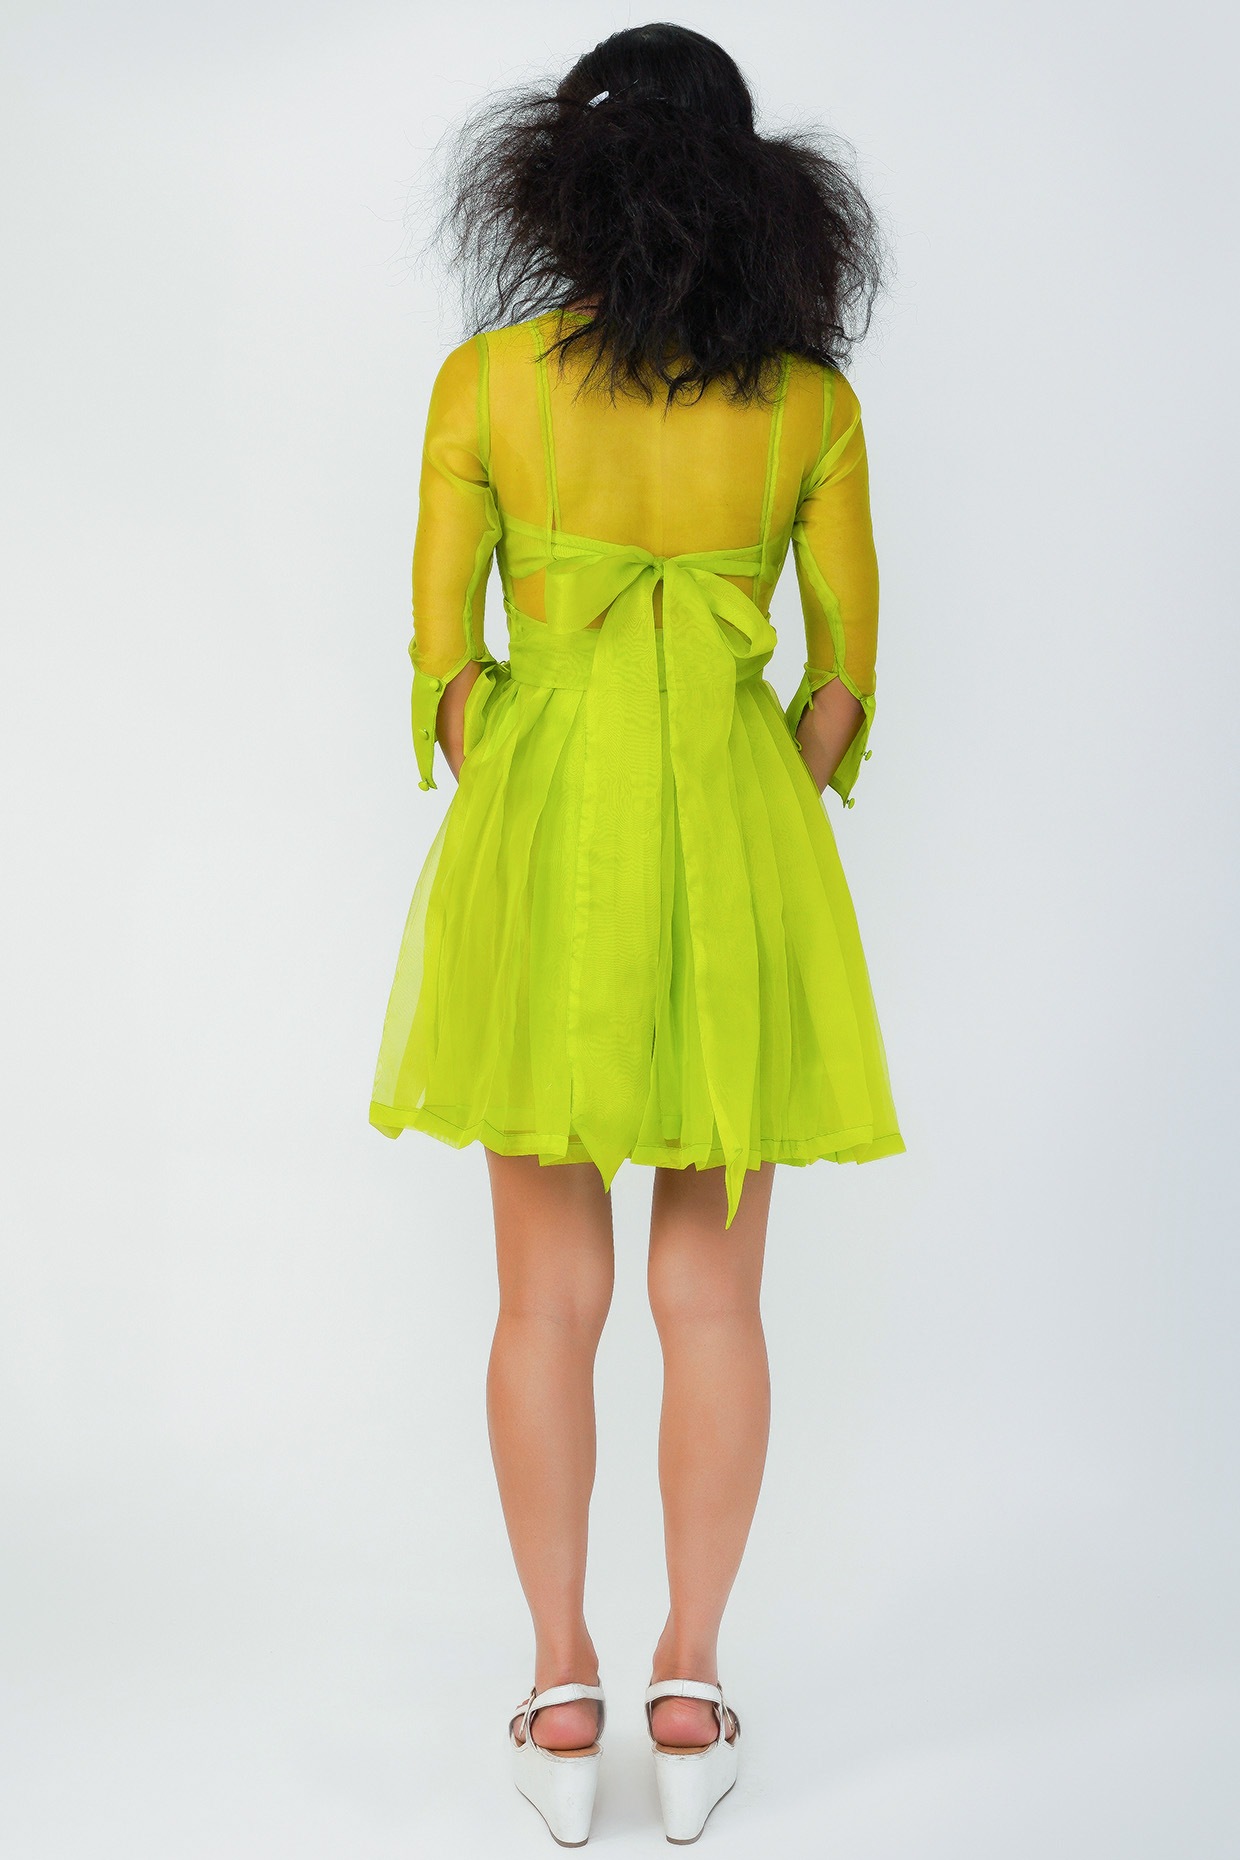 The NEON GREEN Dress – Mave Couture